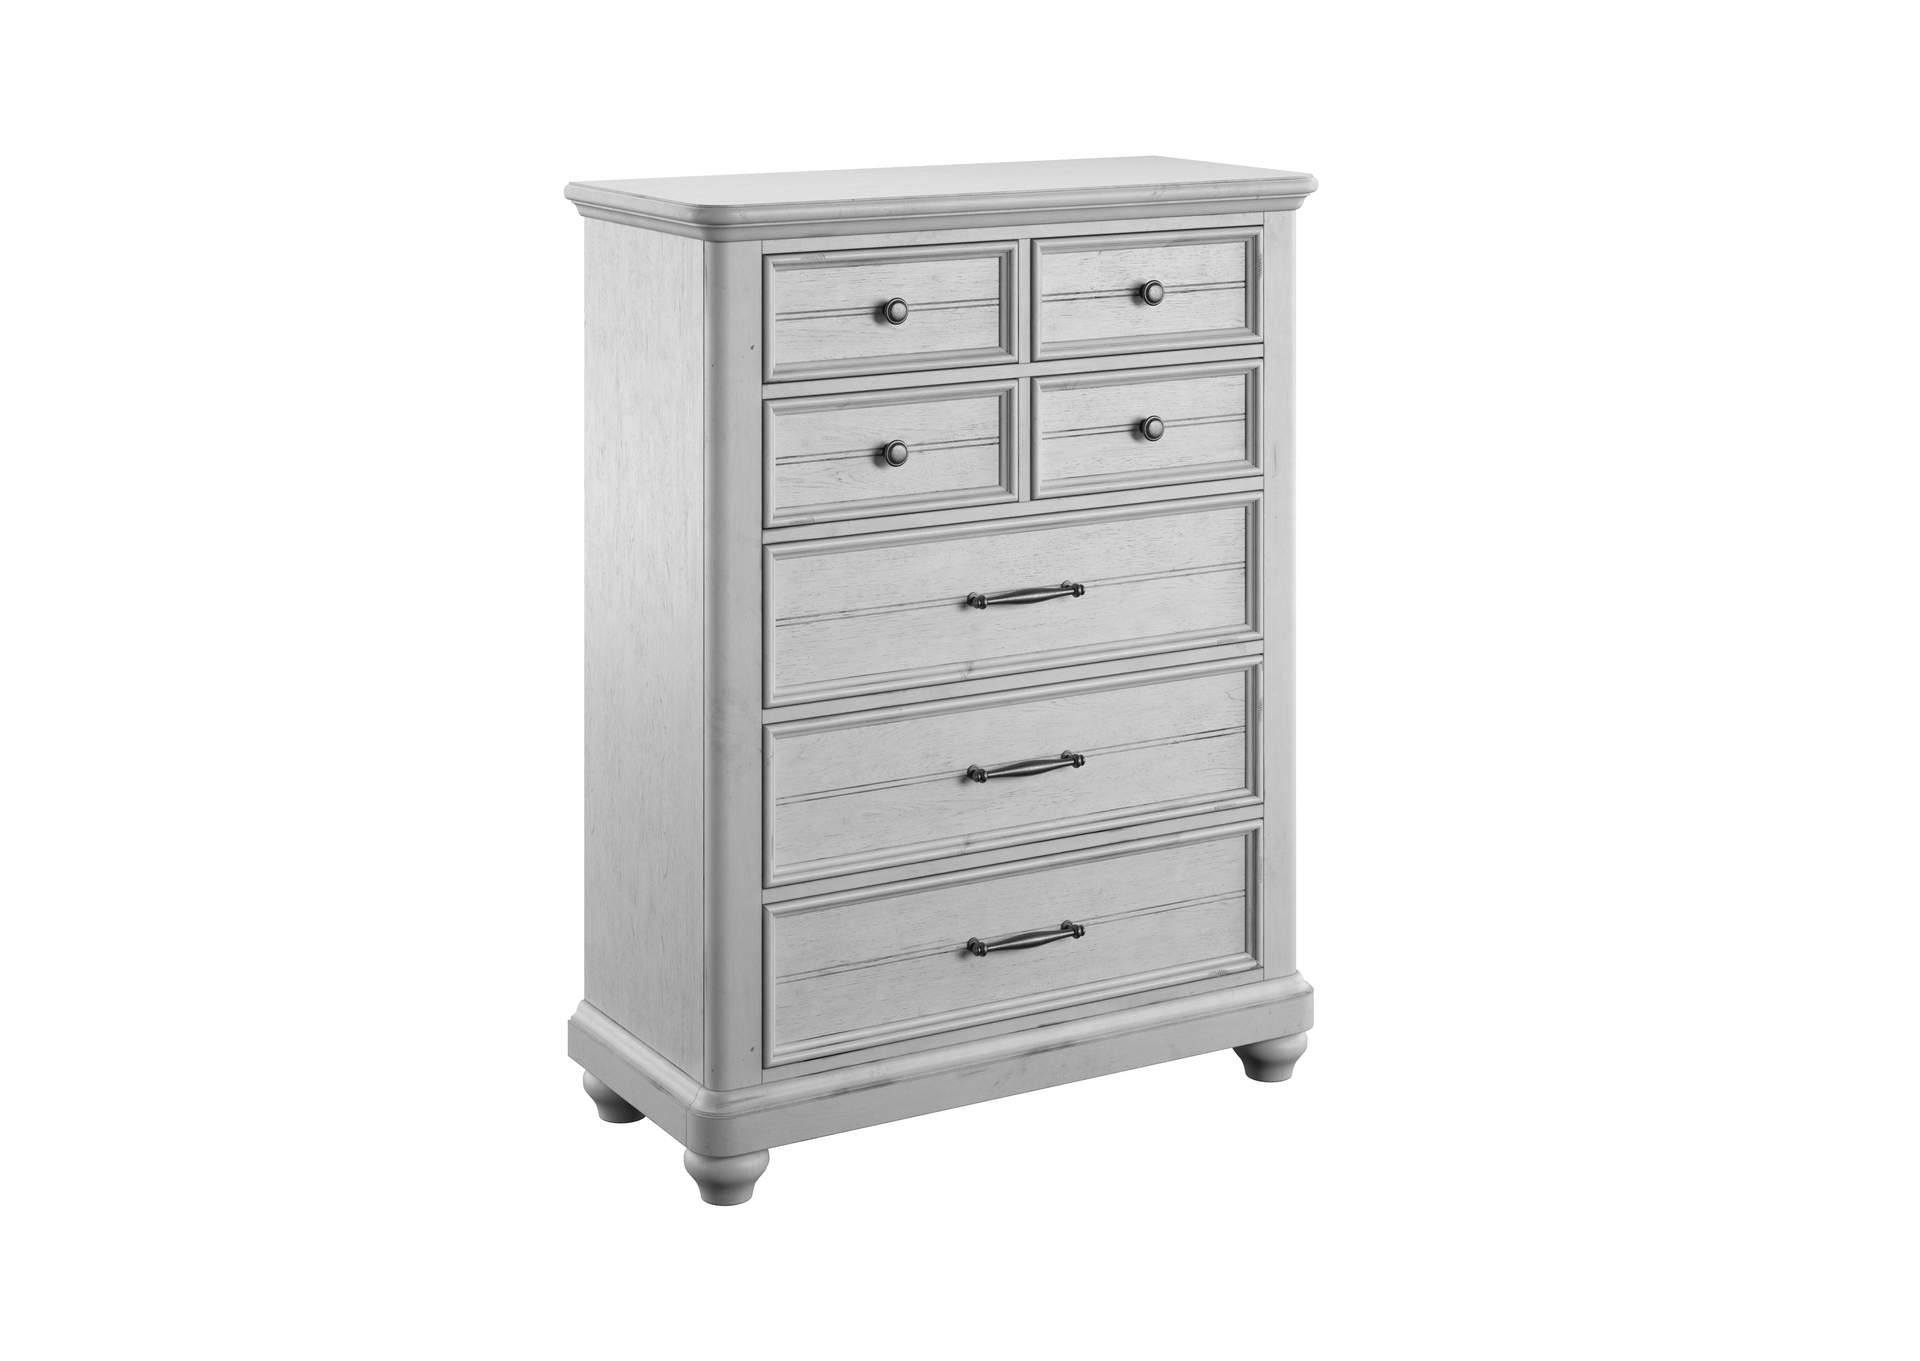 New Haven Drawer Chest,Emerald Home Furnishings